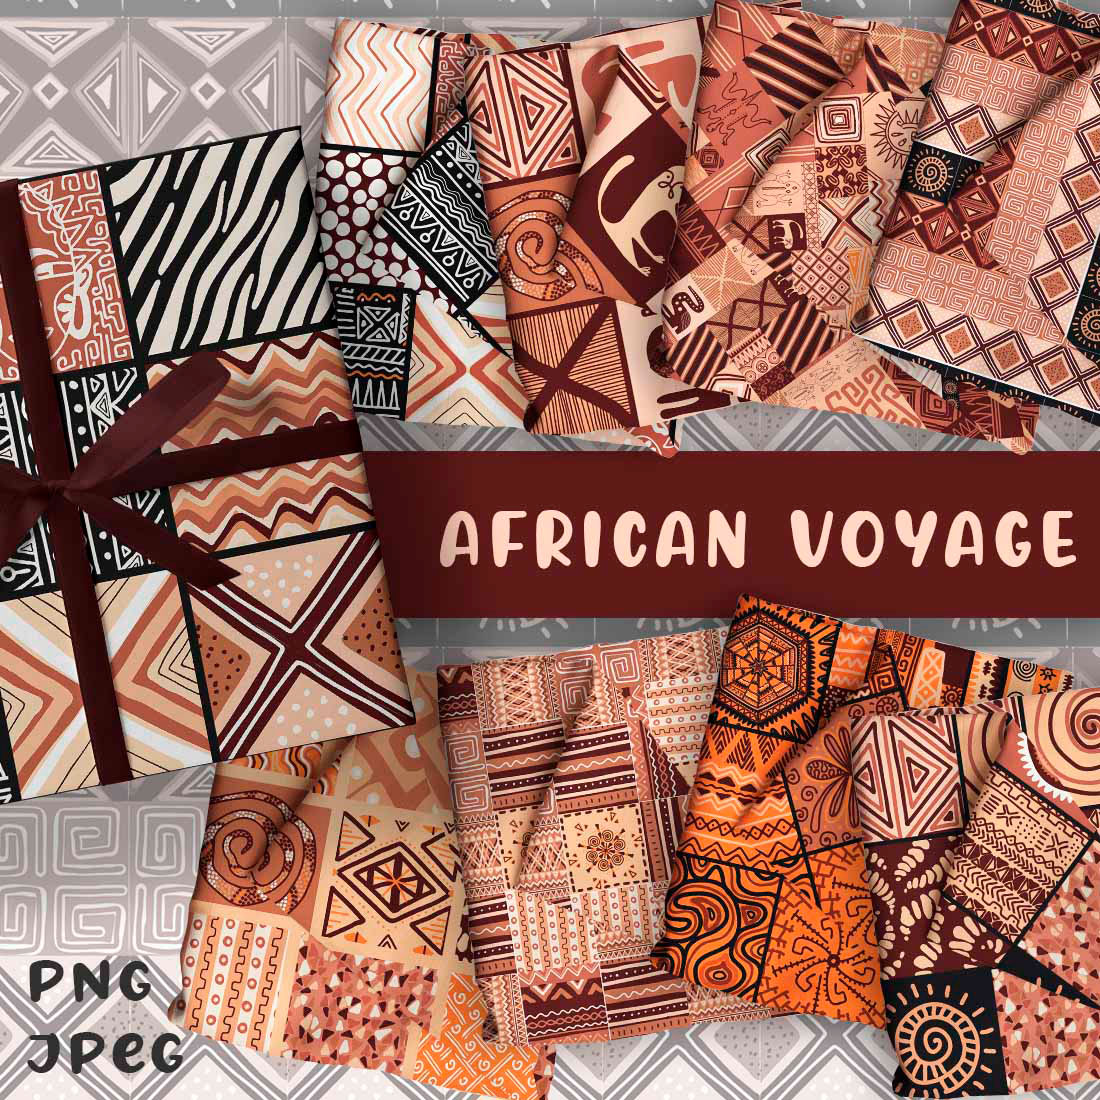 Collection of unique images of patterns in African style.